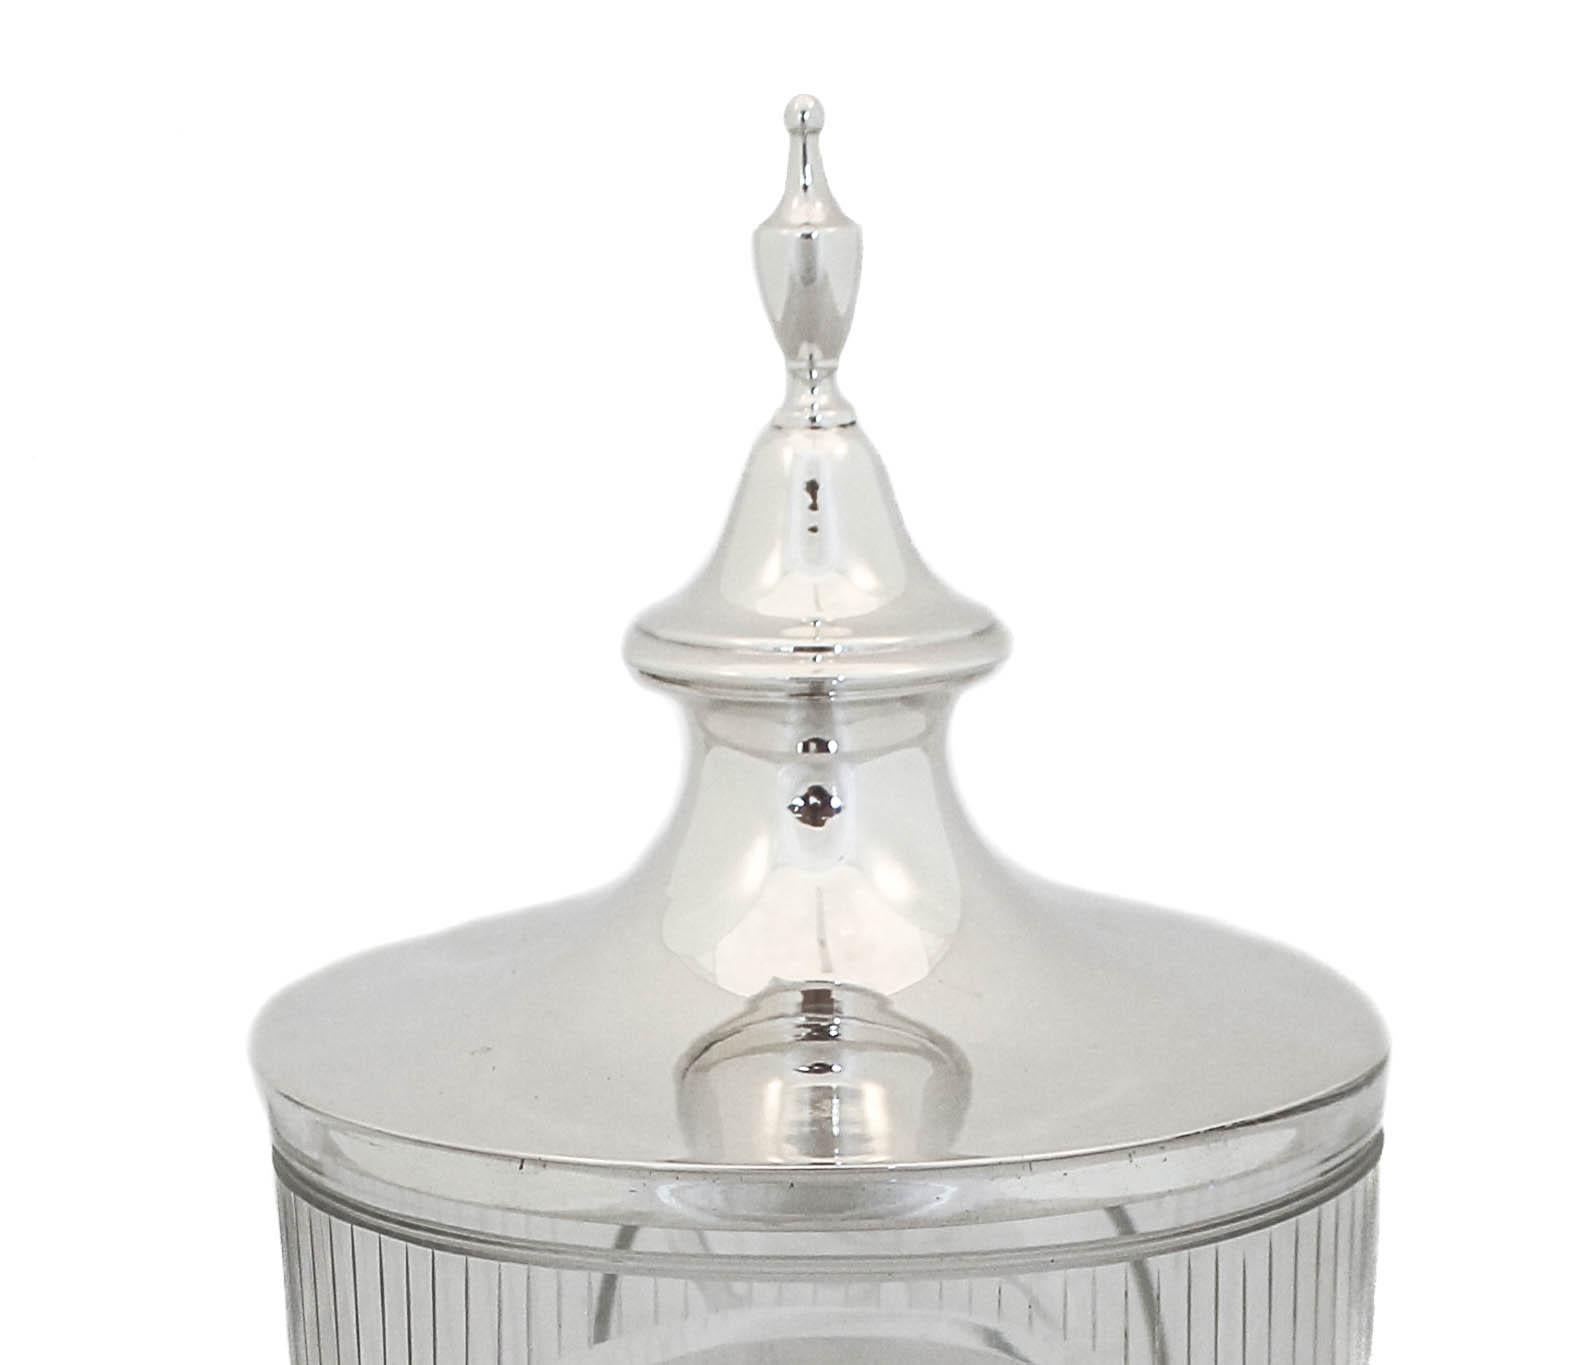 Being offered is a sterling silver and crystal urn by International Silver. The lid is sterling silver and the urn is crystal. The glass has an acid-etched motif; stripes all around and on both sides in a circle a cluster of grapes on their vines. A